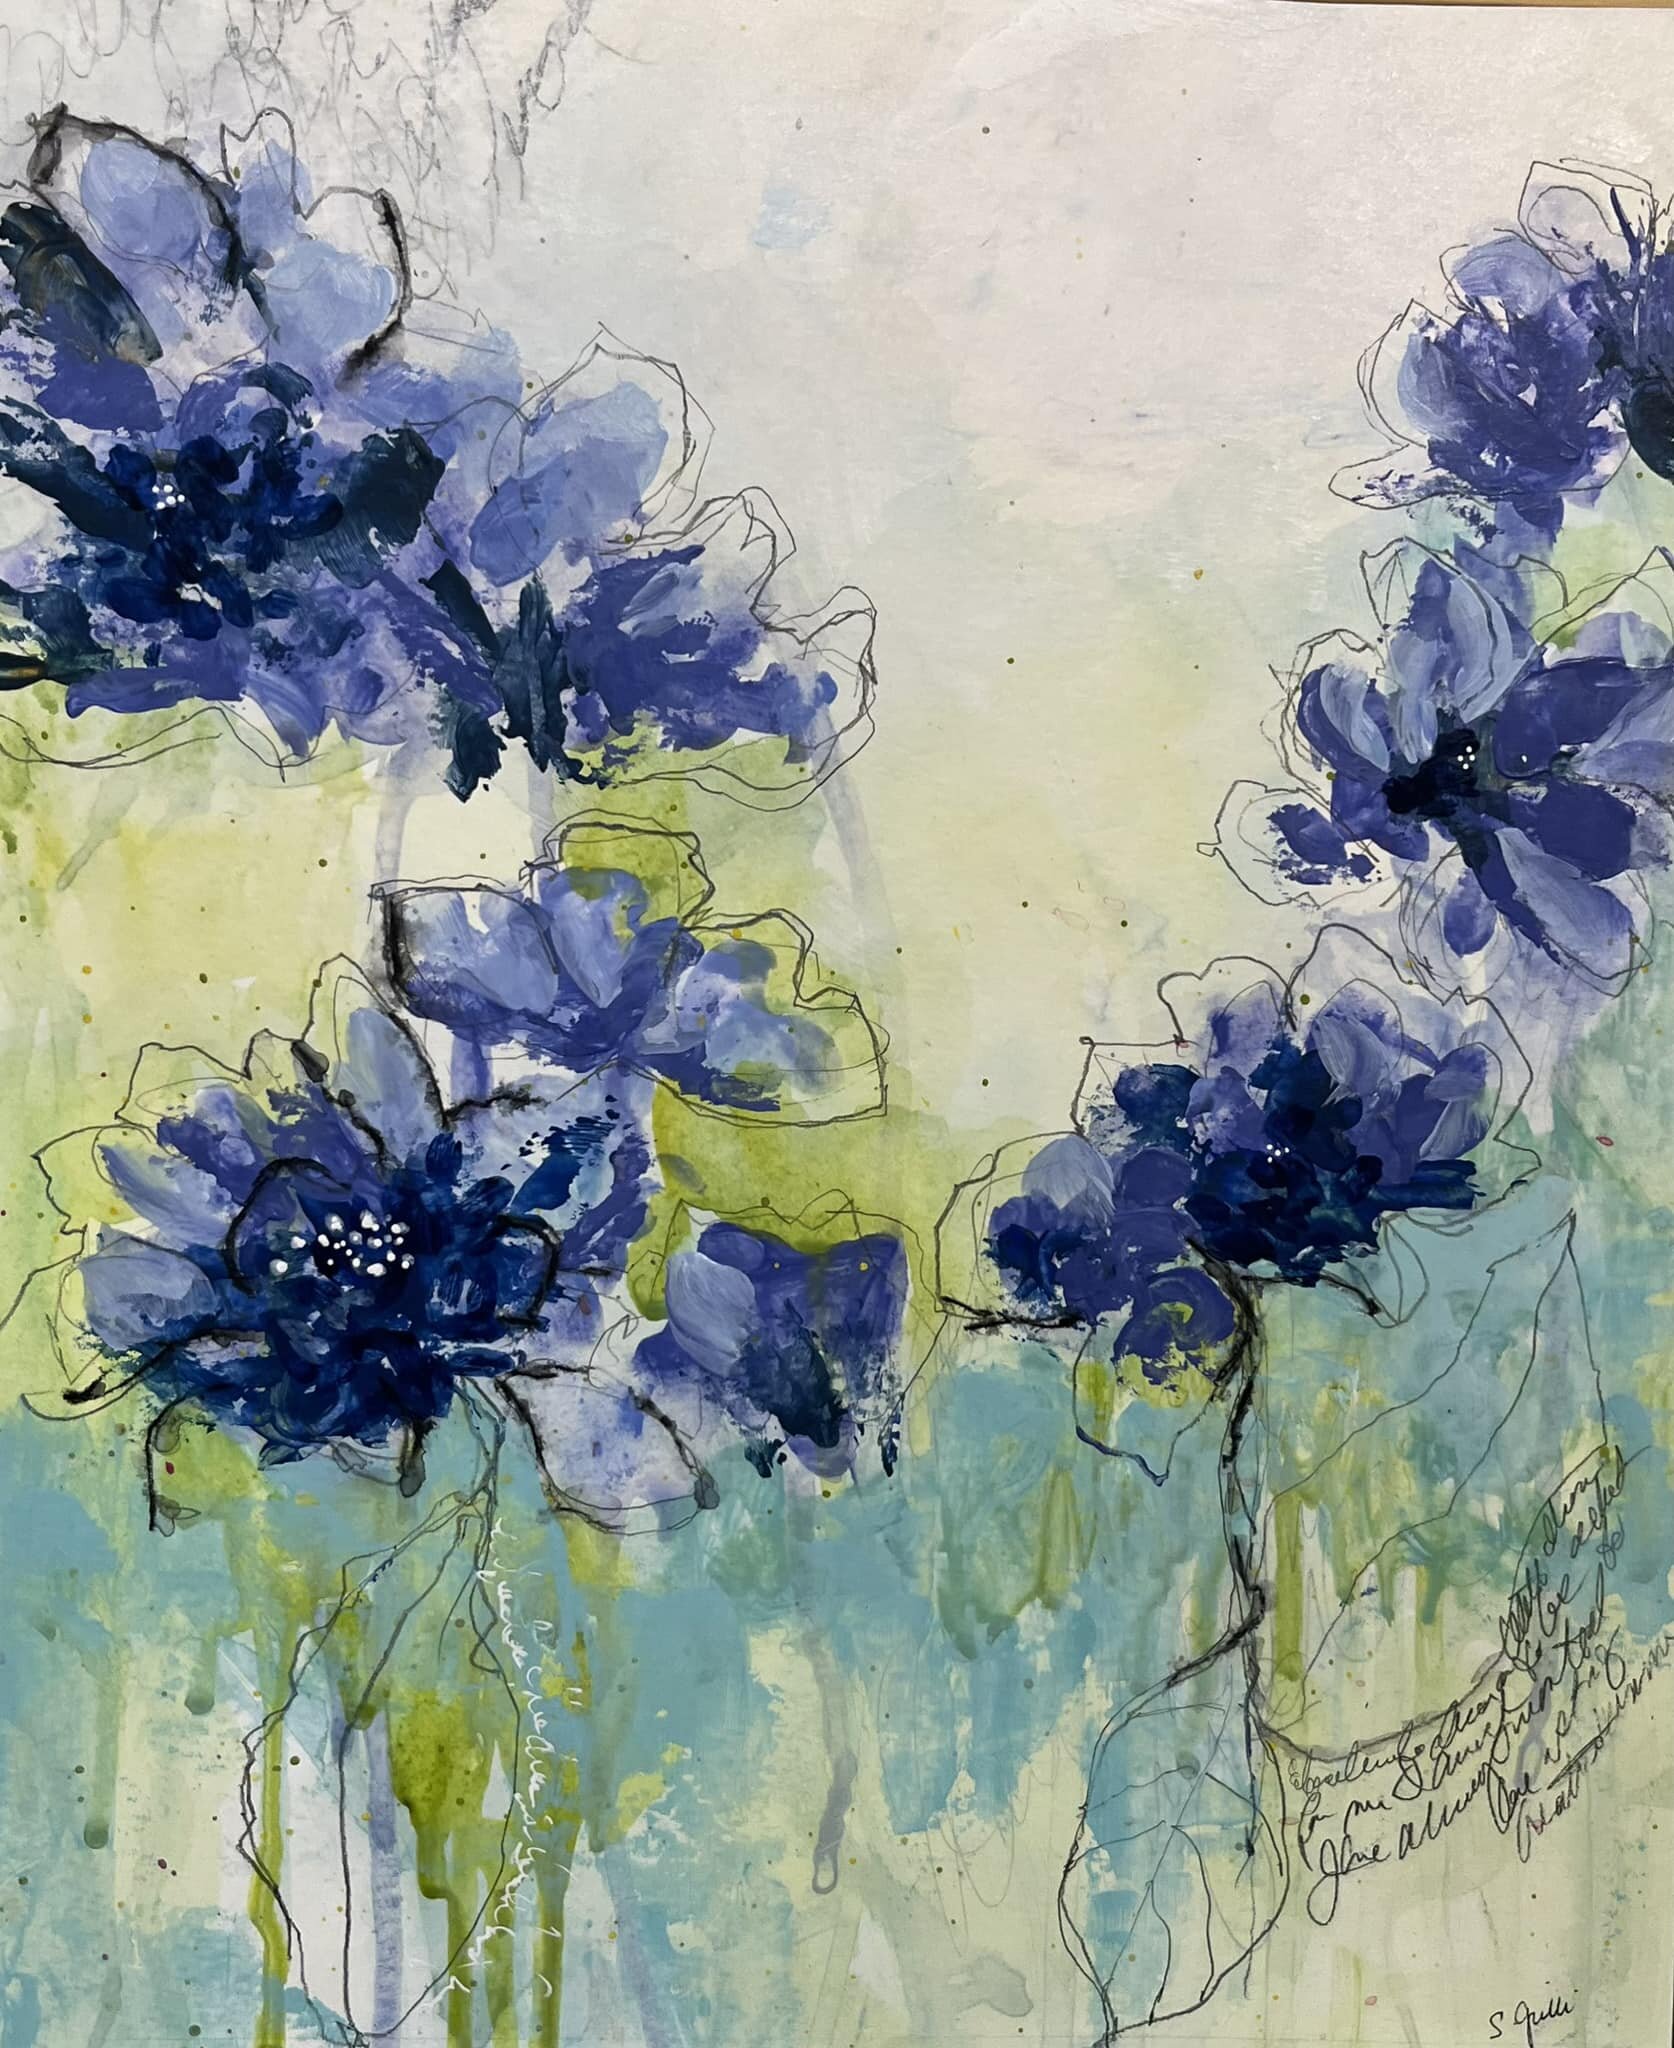 Can an artist have a favorite painting? Well if so then this is o e of them. Love the soft blue and lavender shades. 
&ldquo;Delightful Blues&rdquo; 10 x 12, framed and ready to hang. Available at La Petite La Petite Gallerie or message me directly.